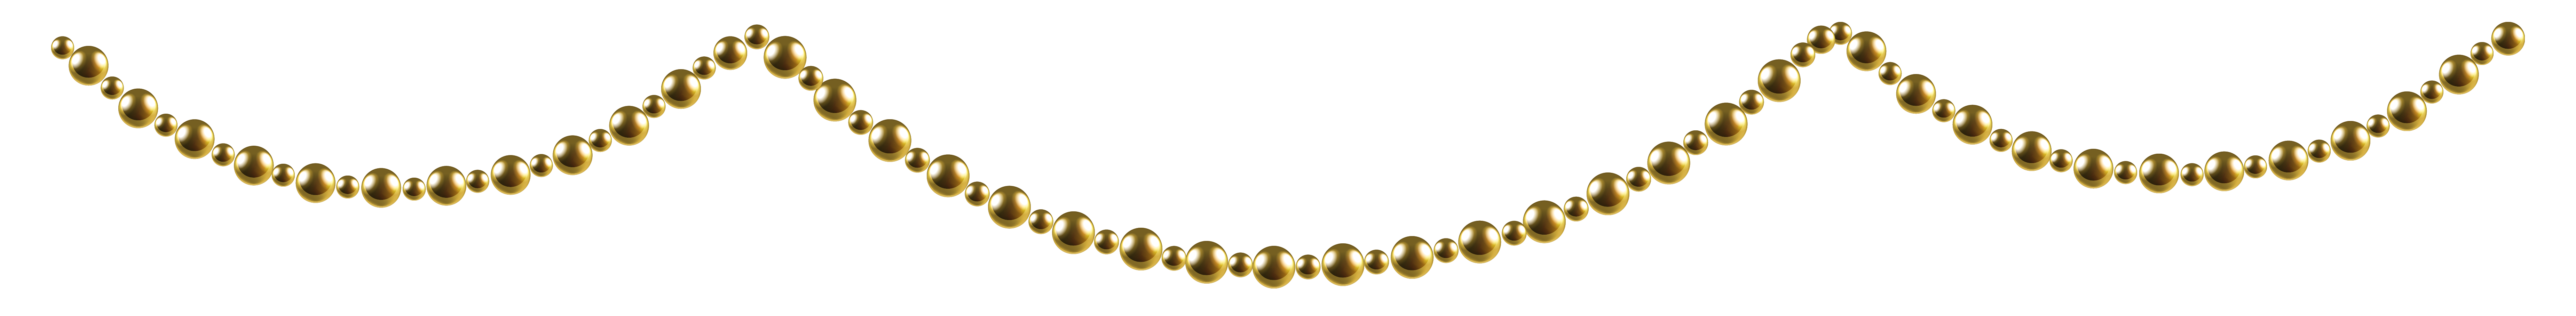 Download garland free png. Pearl clipart golden